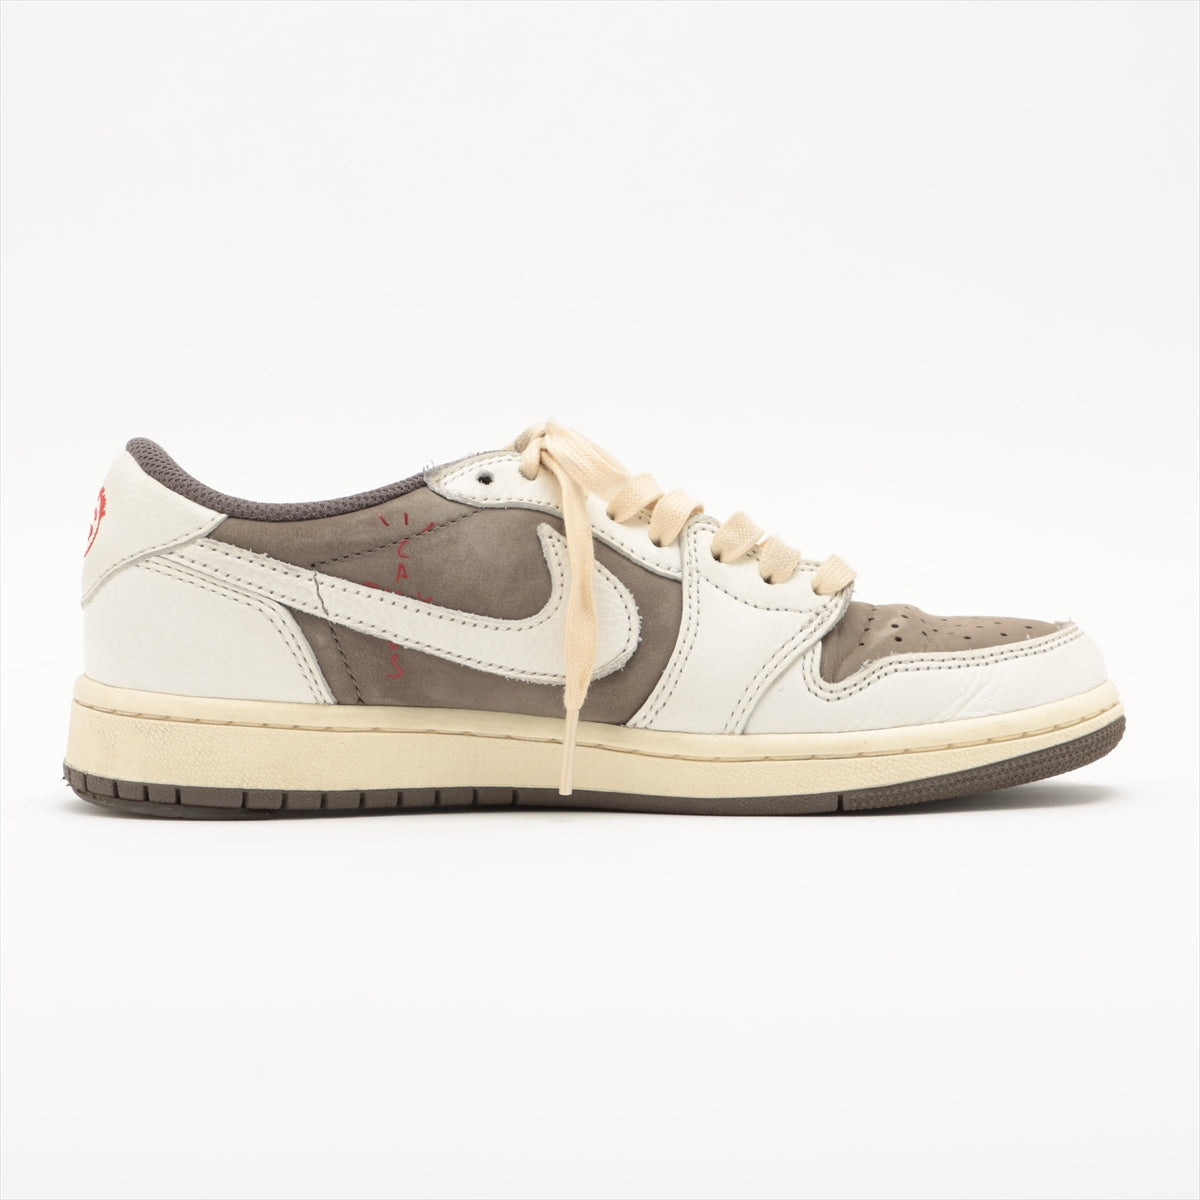 Nike x Travis Scott AIR JORDAN 1 Leather Sneakers 24cm Unisex Gray x white DM7866-162 Replacement Laces Included Heel repair available